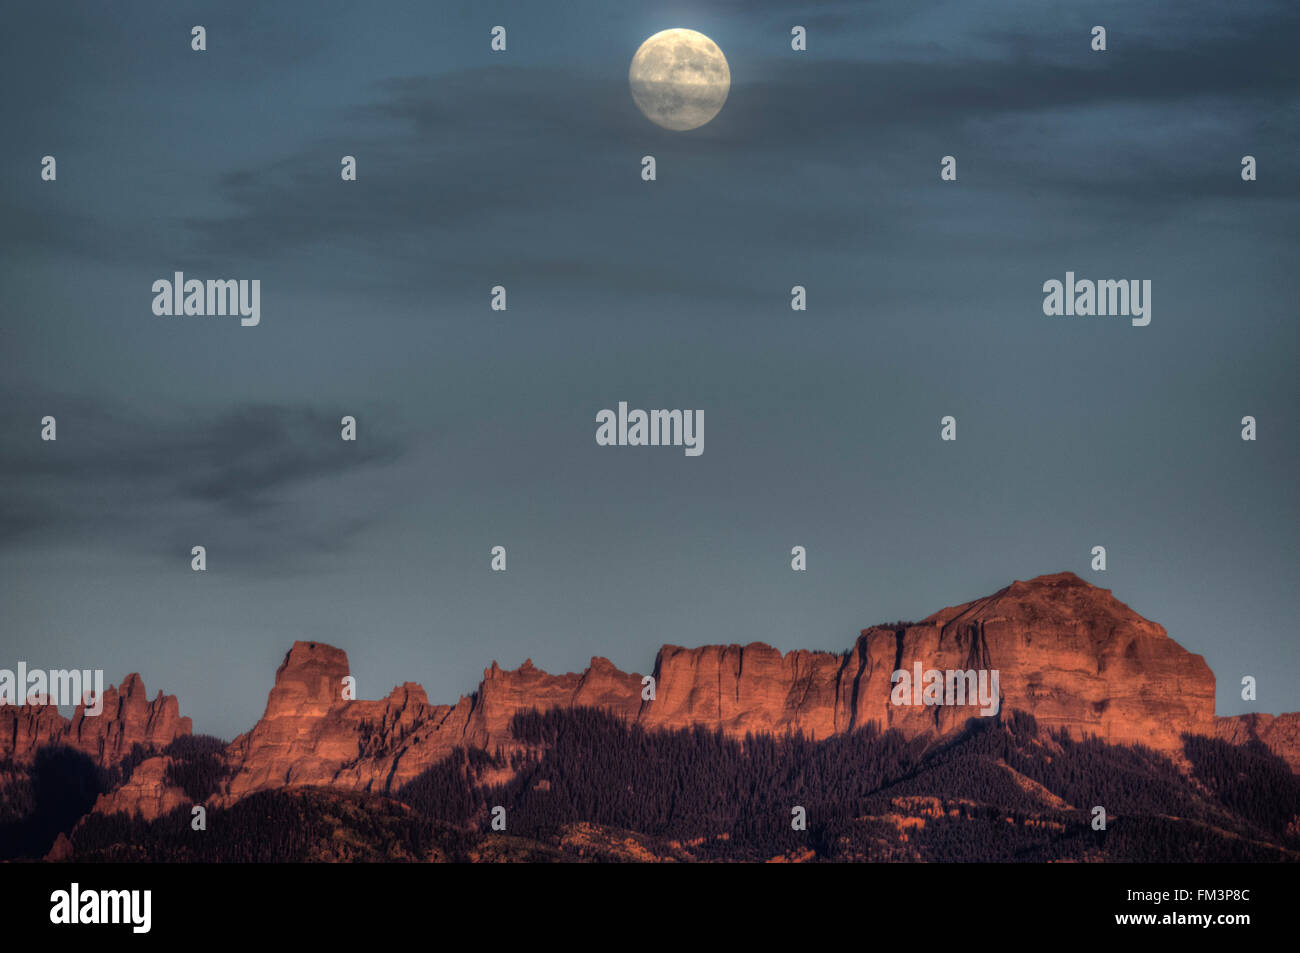 The moon rises over two local landmarks of Ridgeway, Colorado:  Chimney Rock on the left, and Courthouse Mountain on the right. Stock Photo